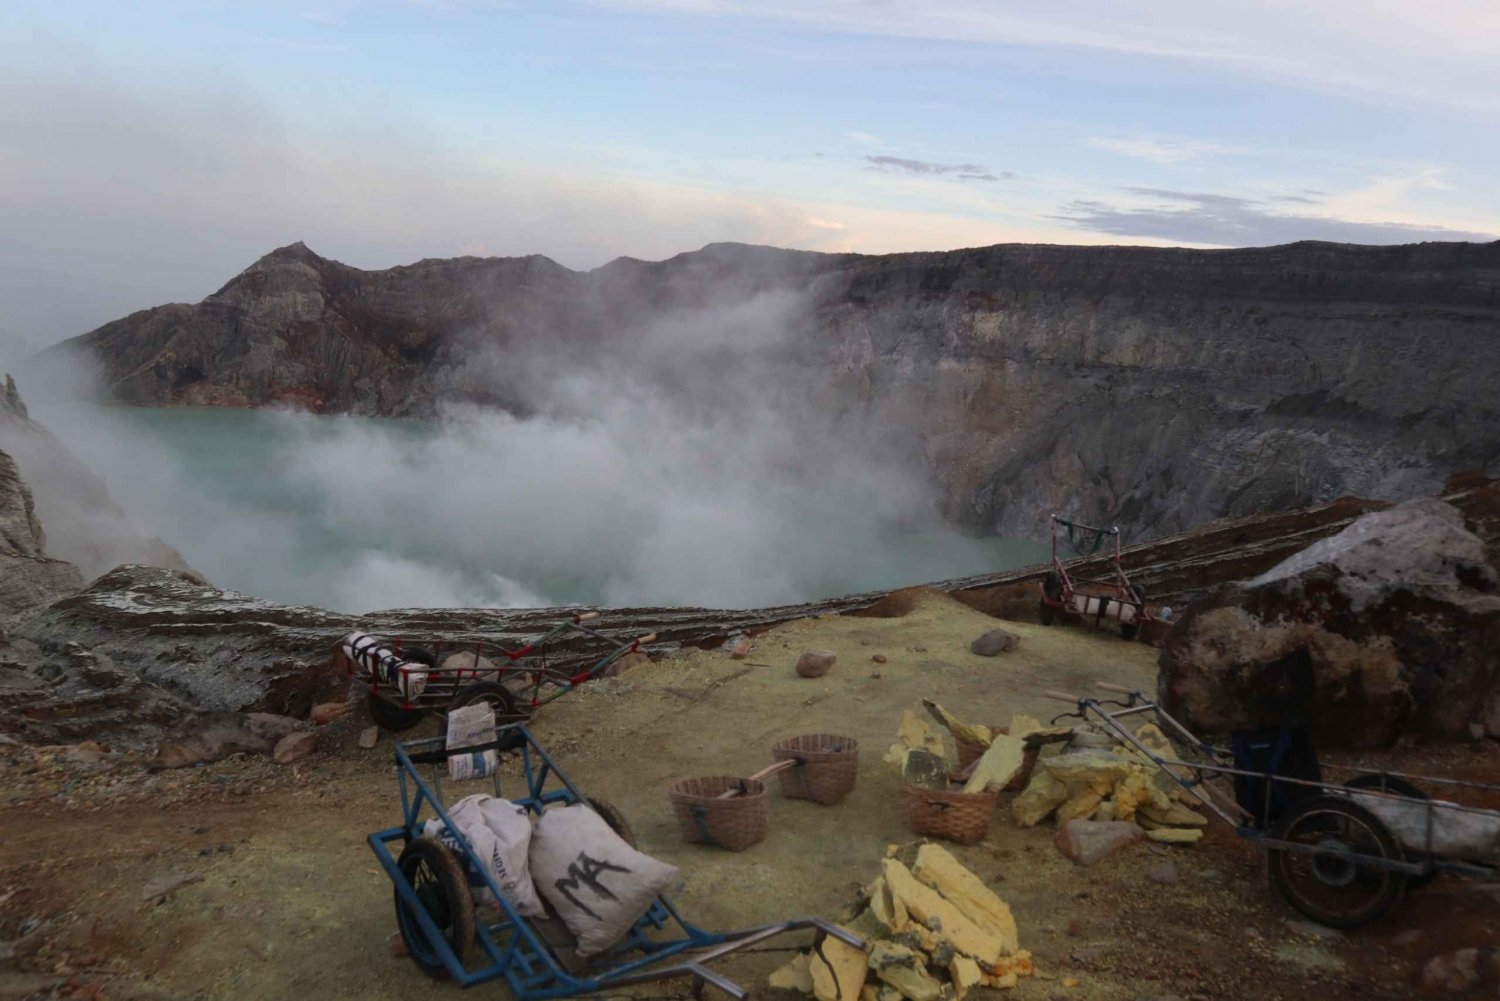 From Bali: Ijen Volcanic Crater 2-Day Trip